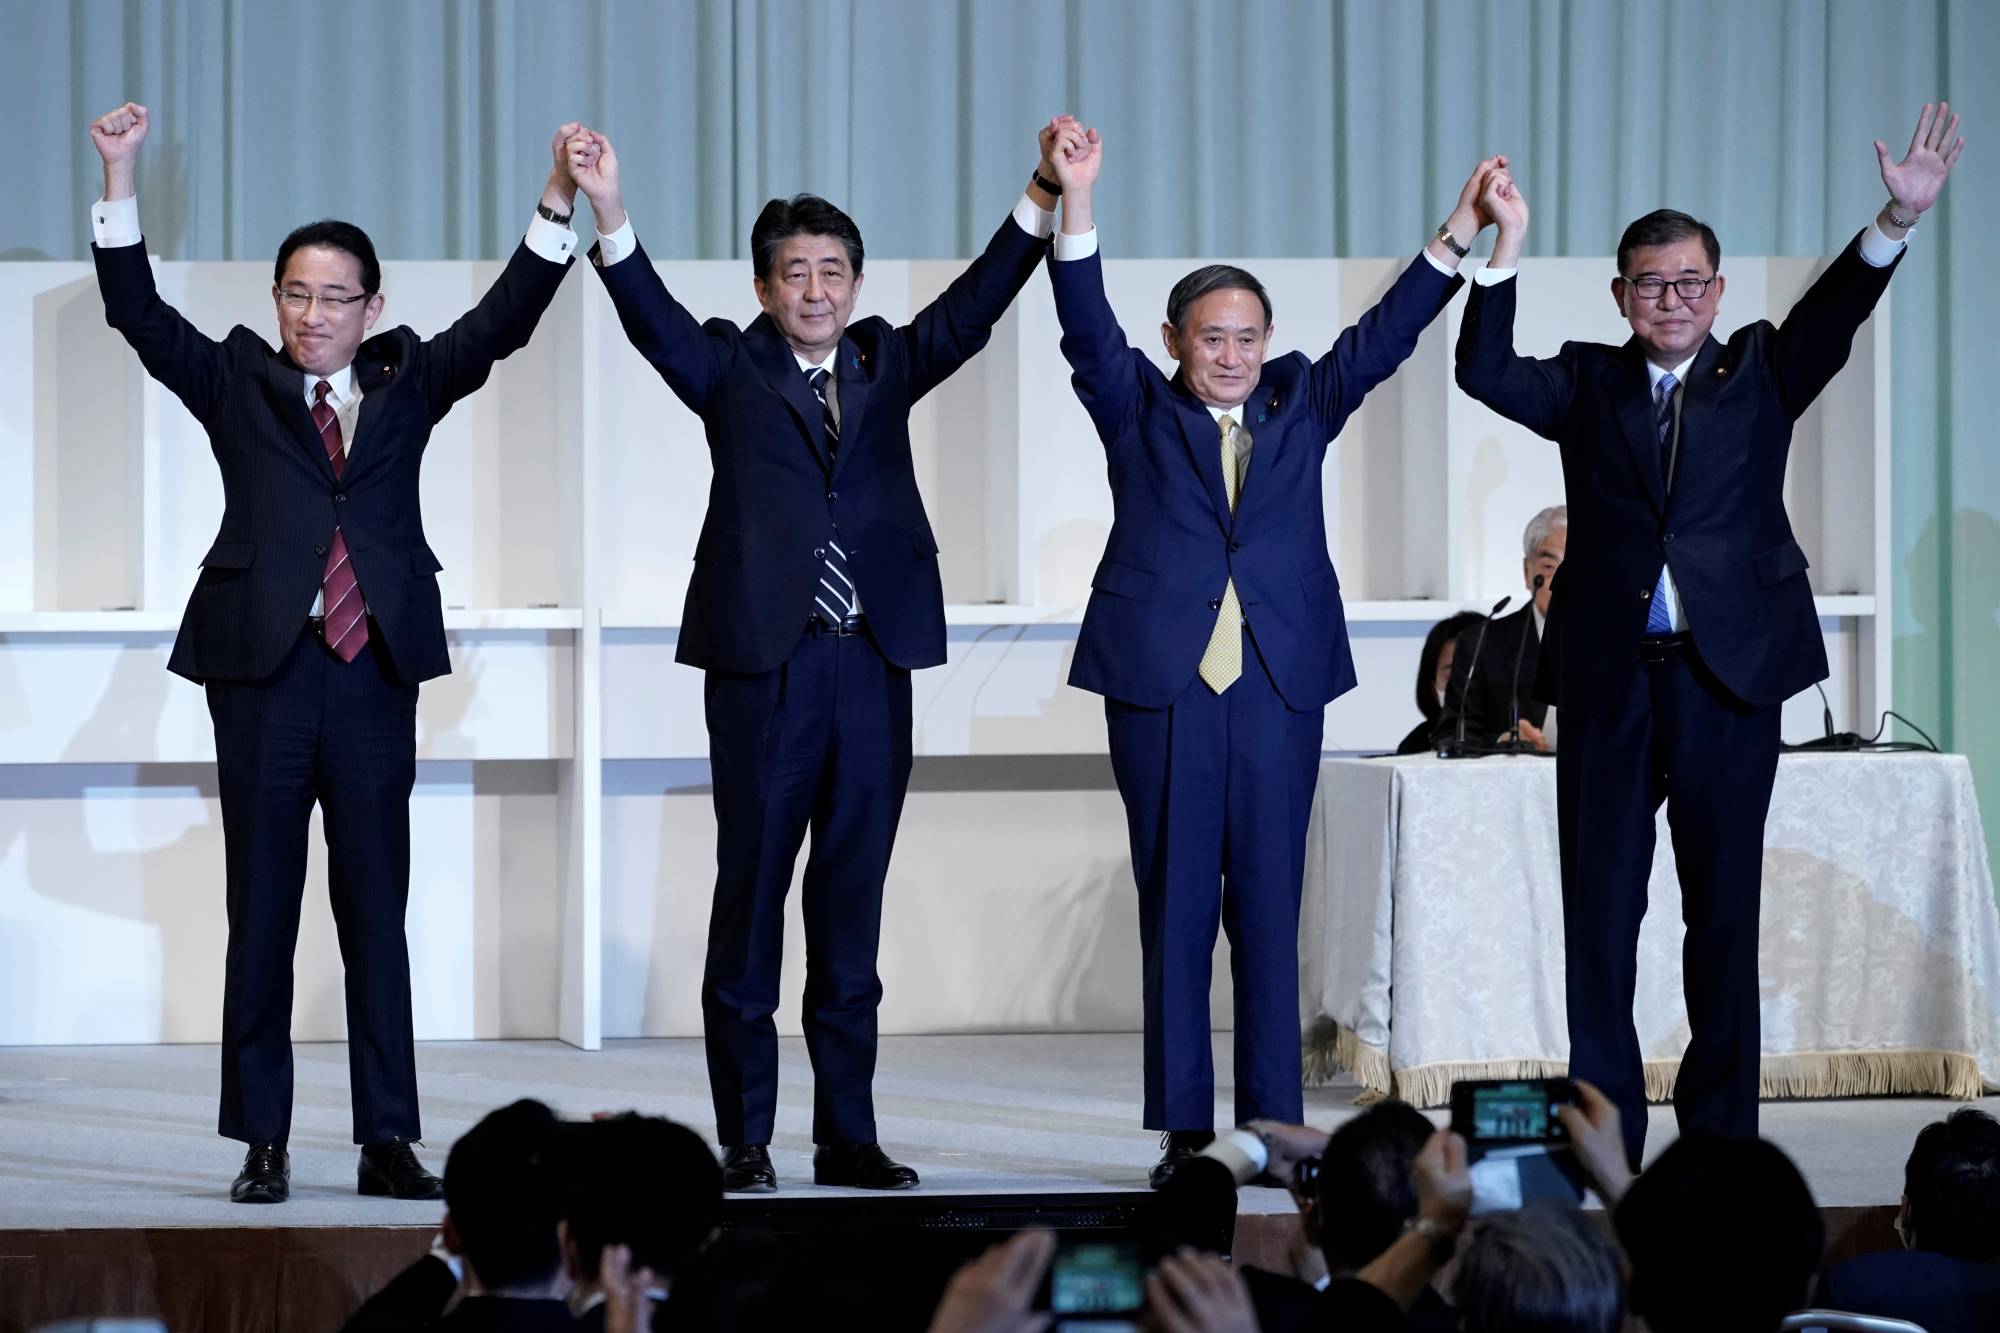 Prime Minister Shinzo Abe, Chief Cabinet Secretary Yoshihide Suga, former Defense Minister Shigeru Ishiba and former Foreign Minister Fumio Kishida celebrate after Suga was elected as new head of the ruling party at the Liberal Democratic Party's leadership election in Tokyo on Sept. 14, 2020. | POOL / VIA REUTERS